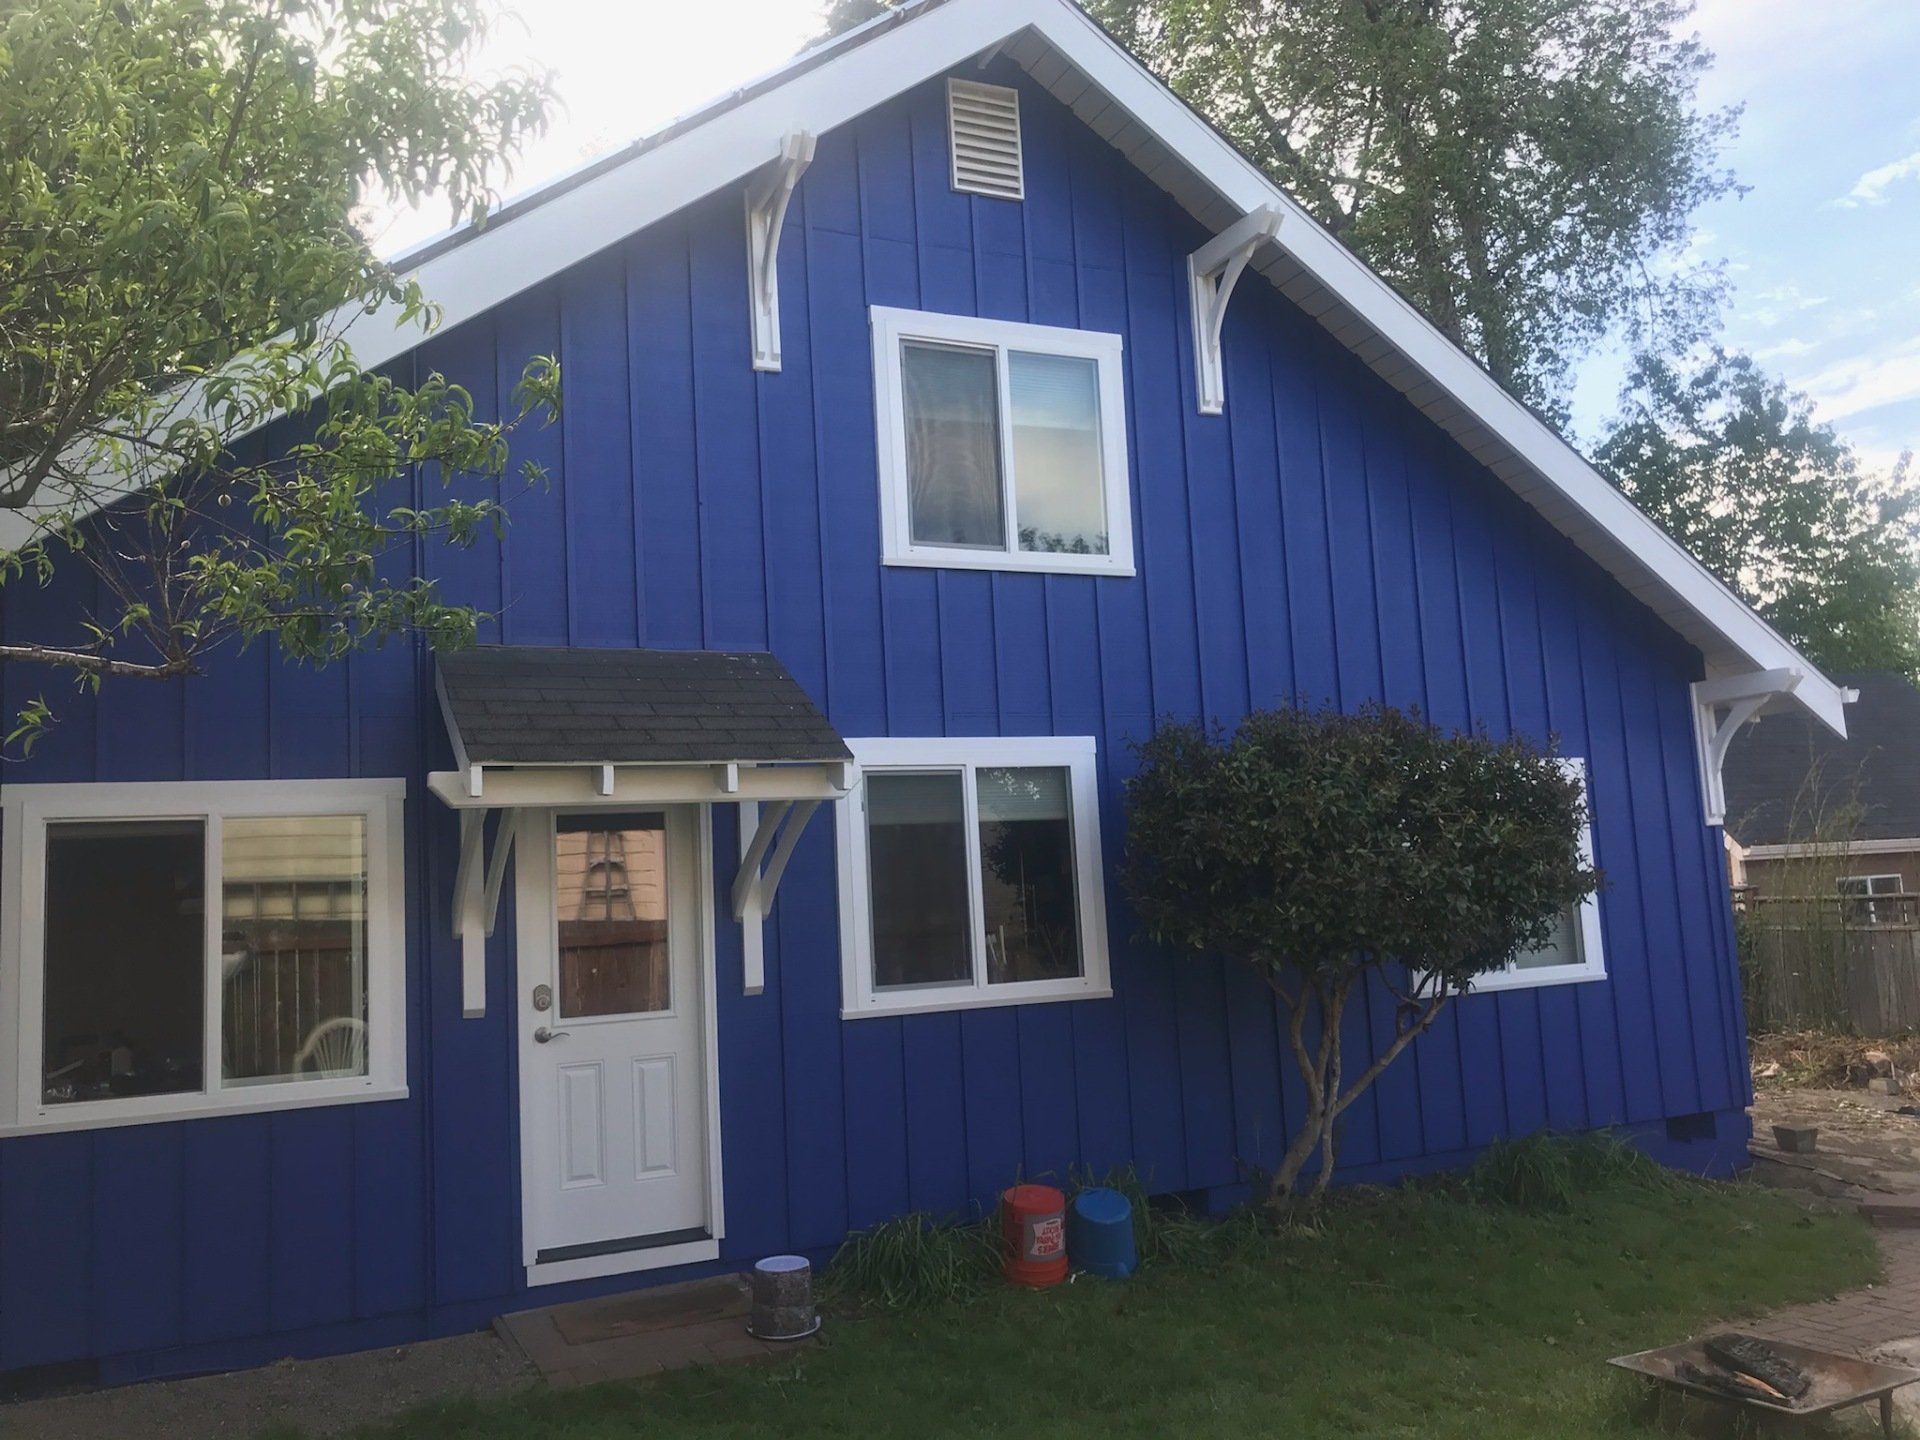 Picture of a blue house.